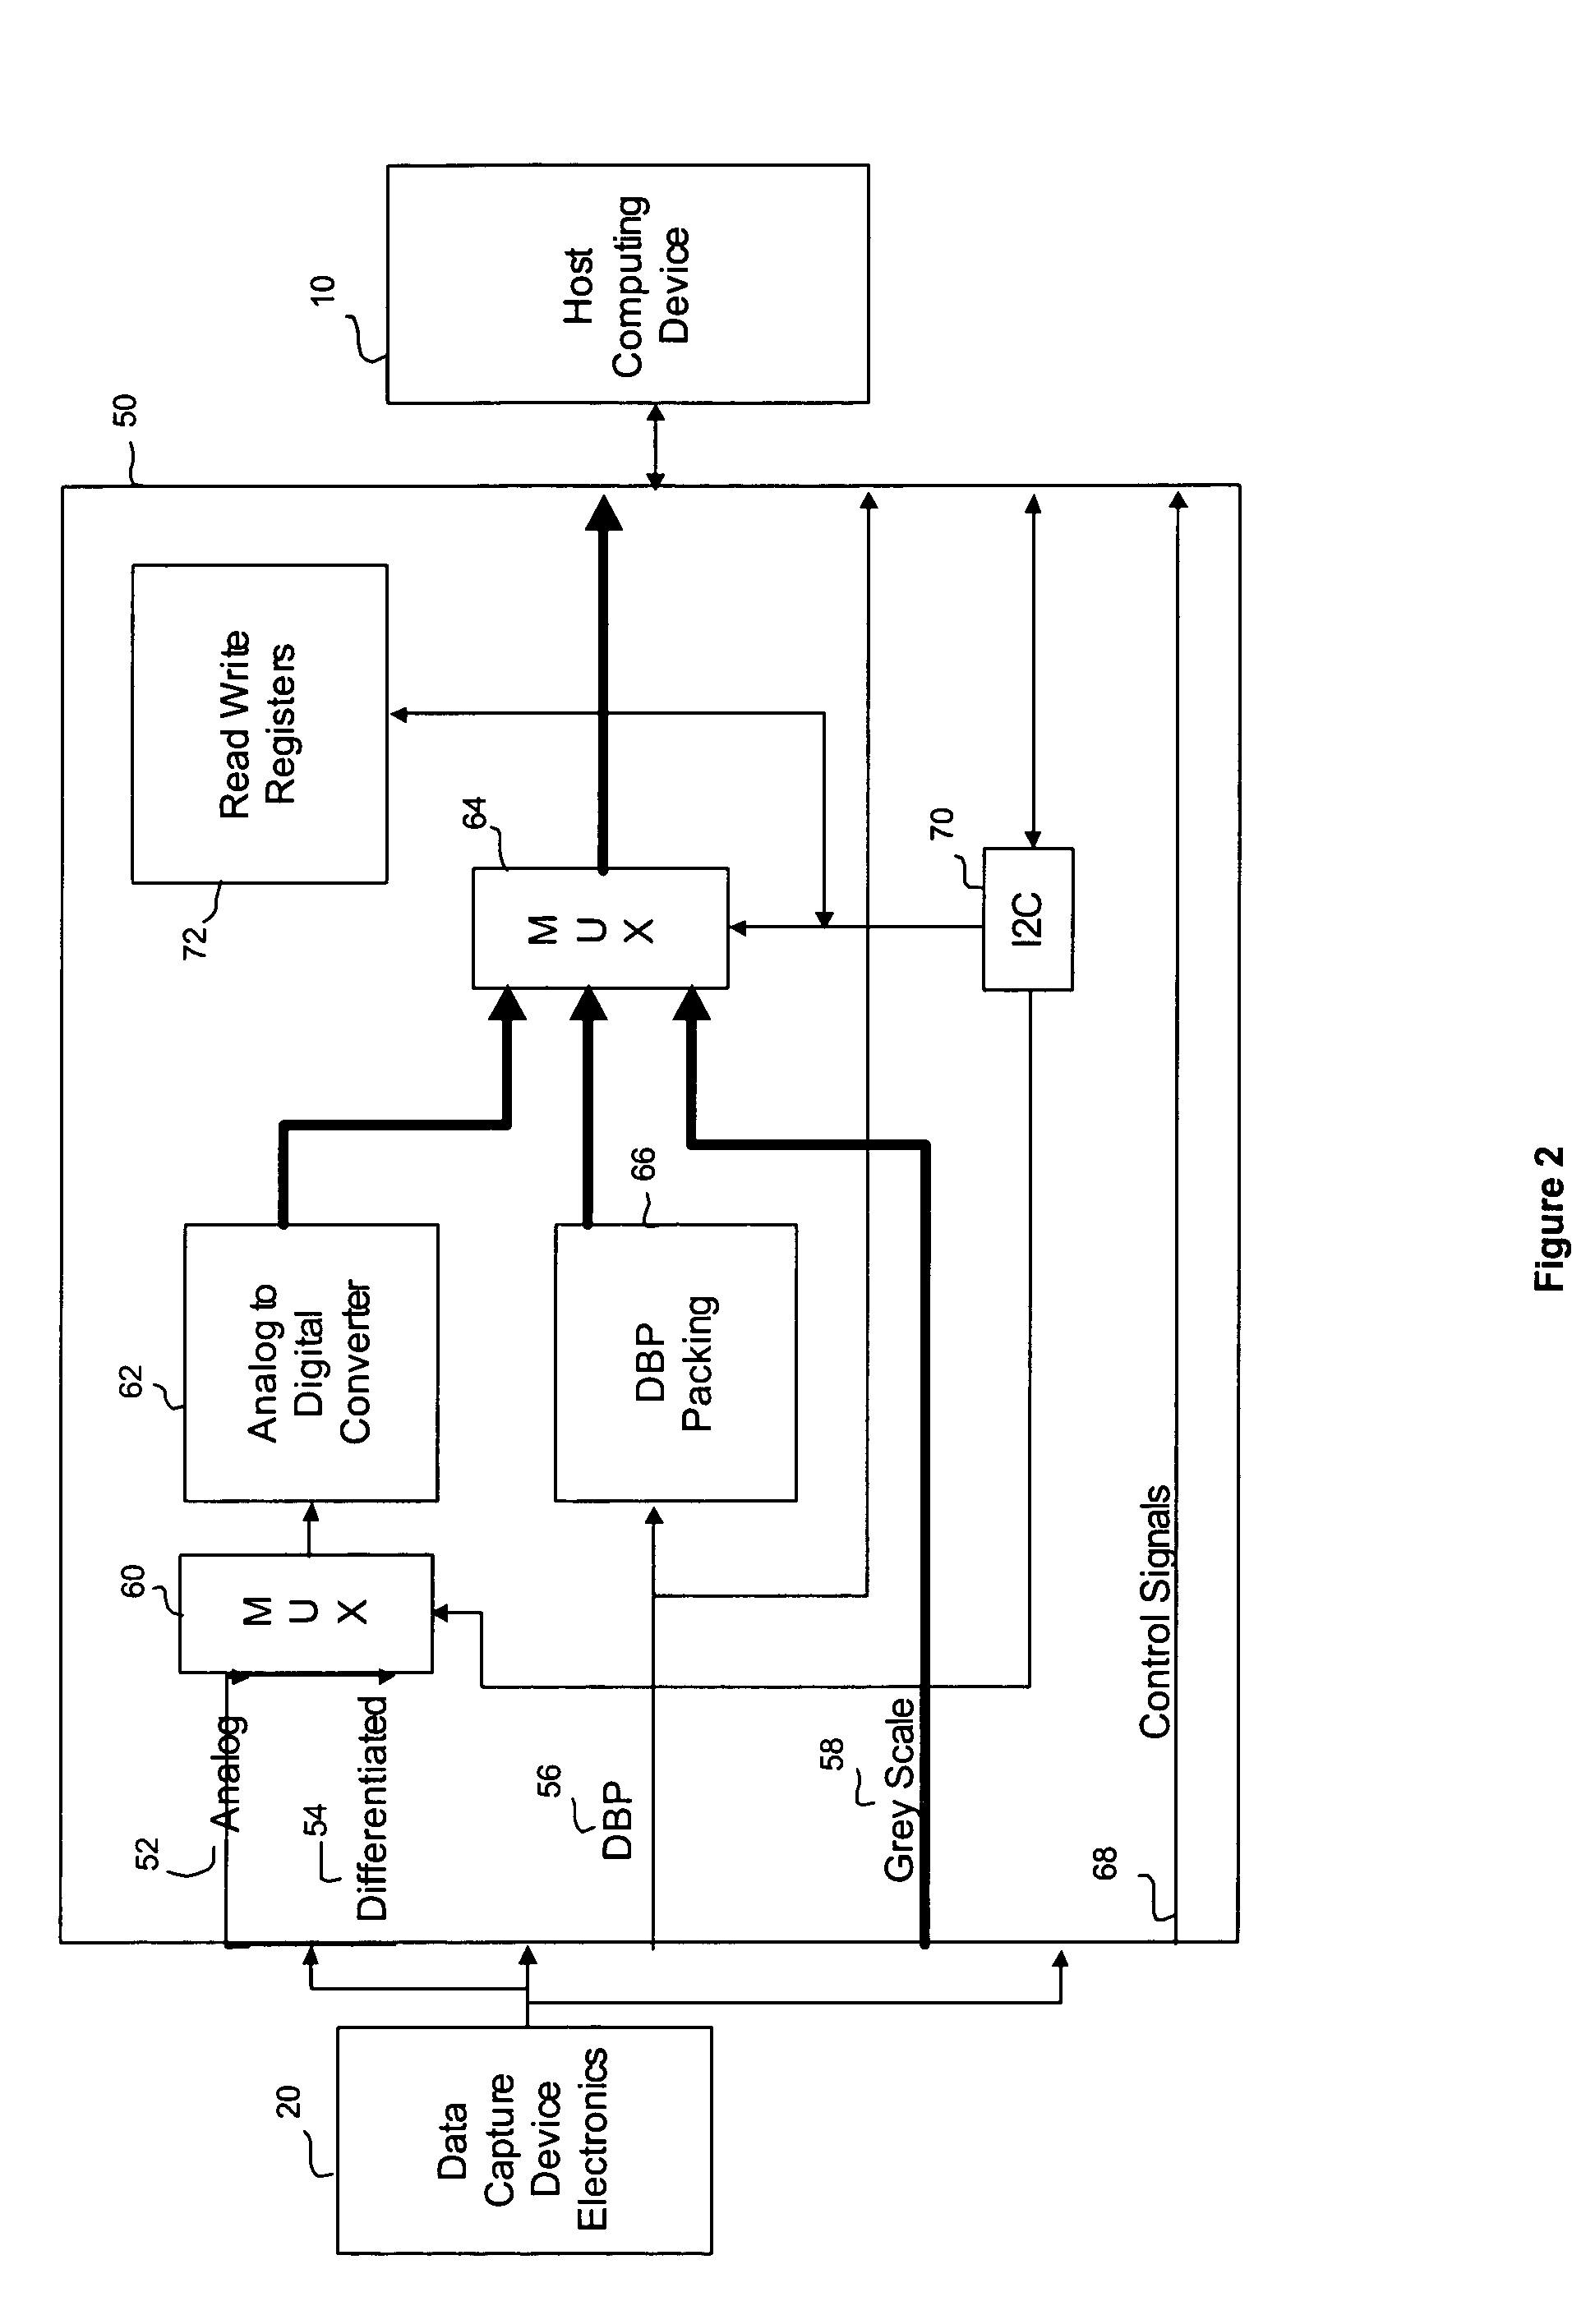 Modular architecture for a data capture device